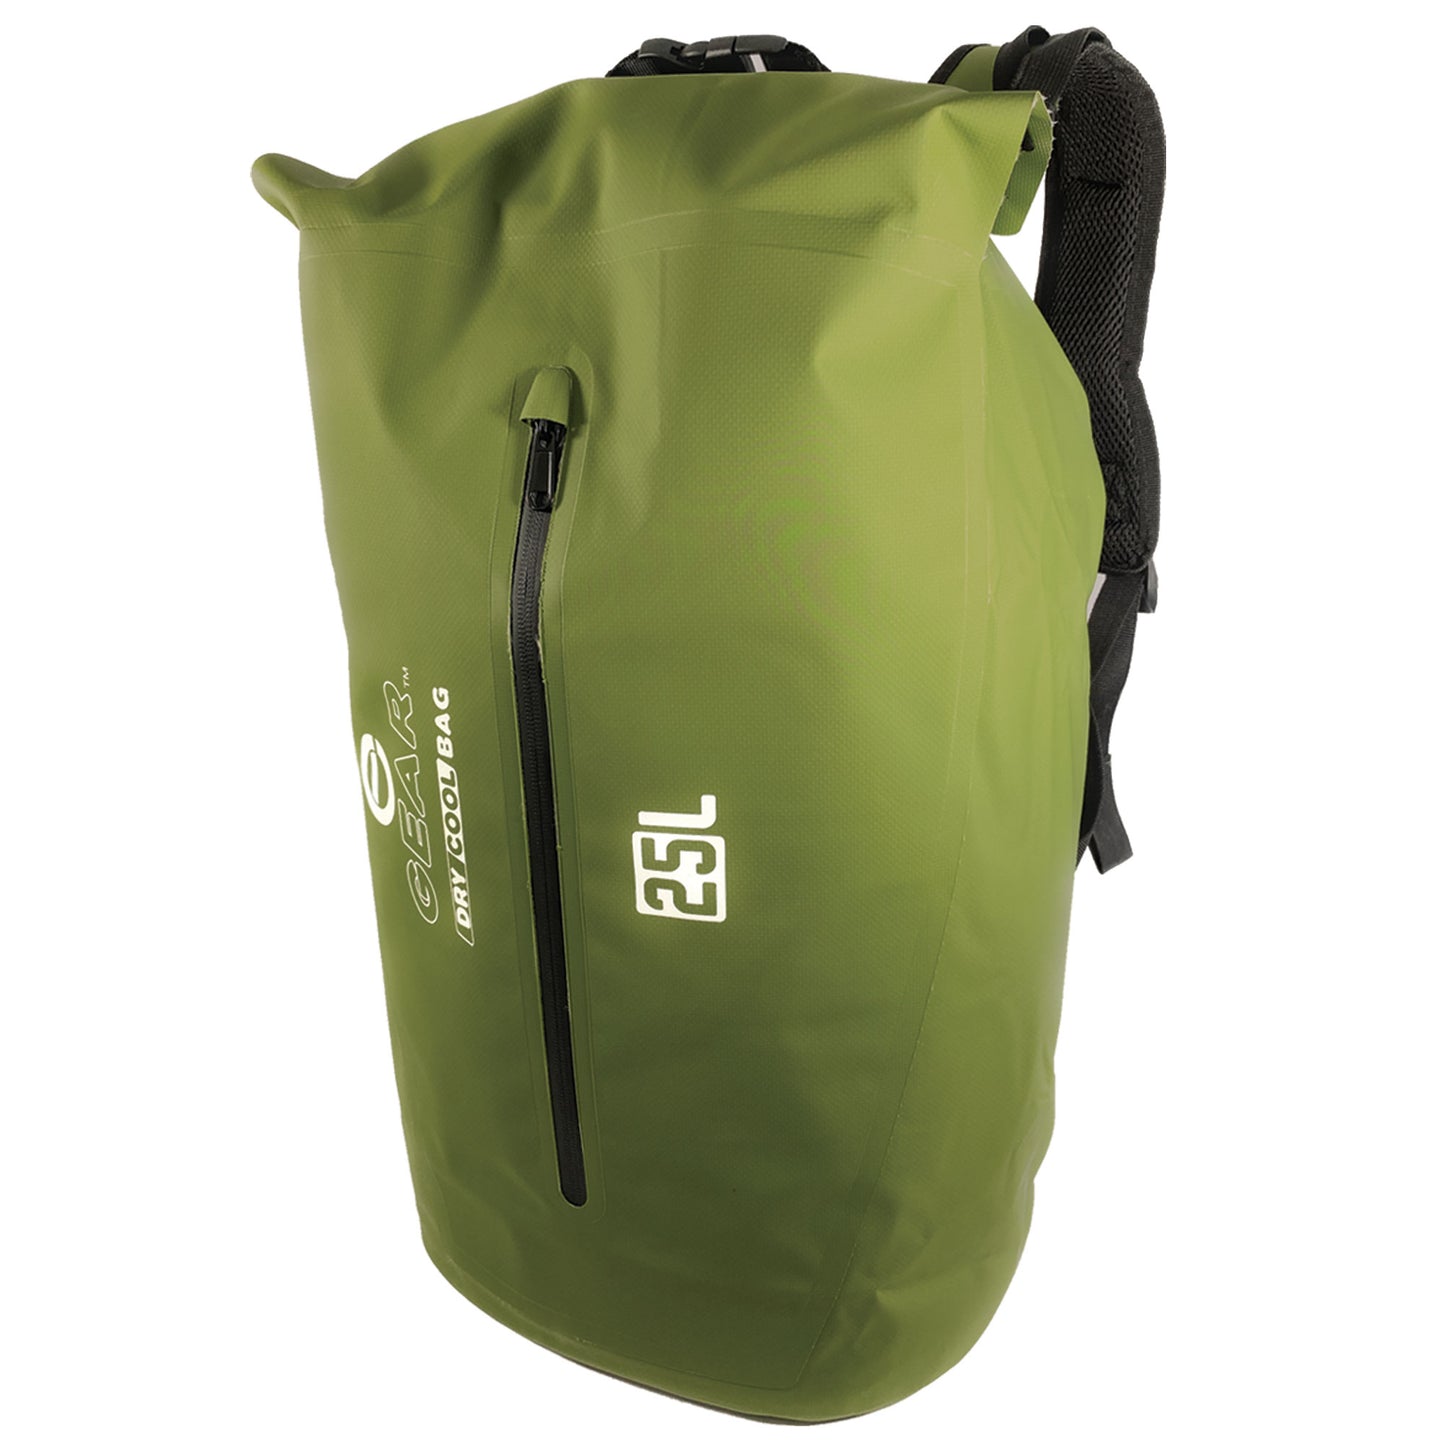 25L - Enthusiast Gear Insulated Dry Bag Floating Cooler – Roll Top